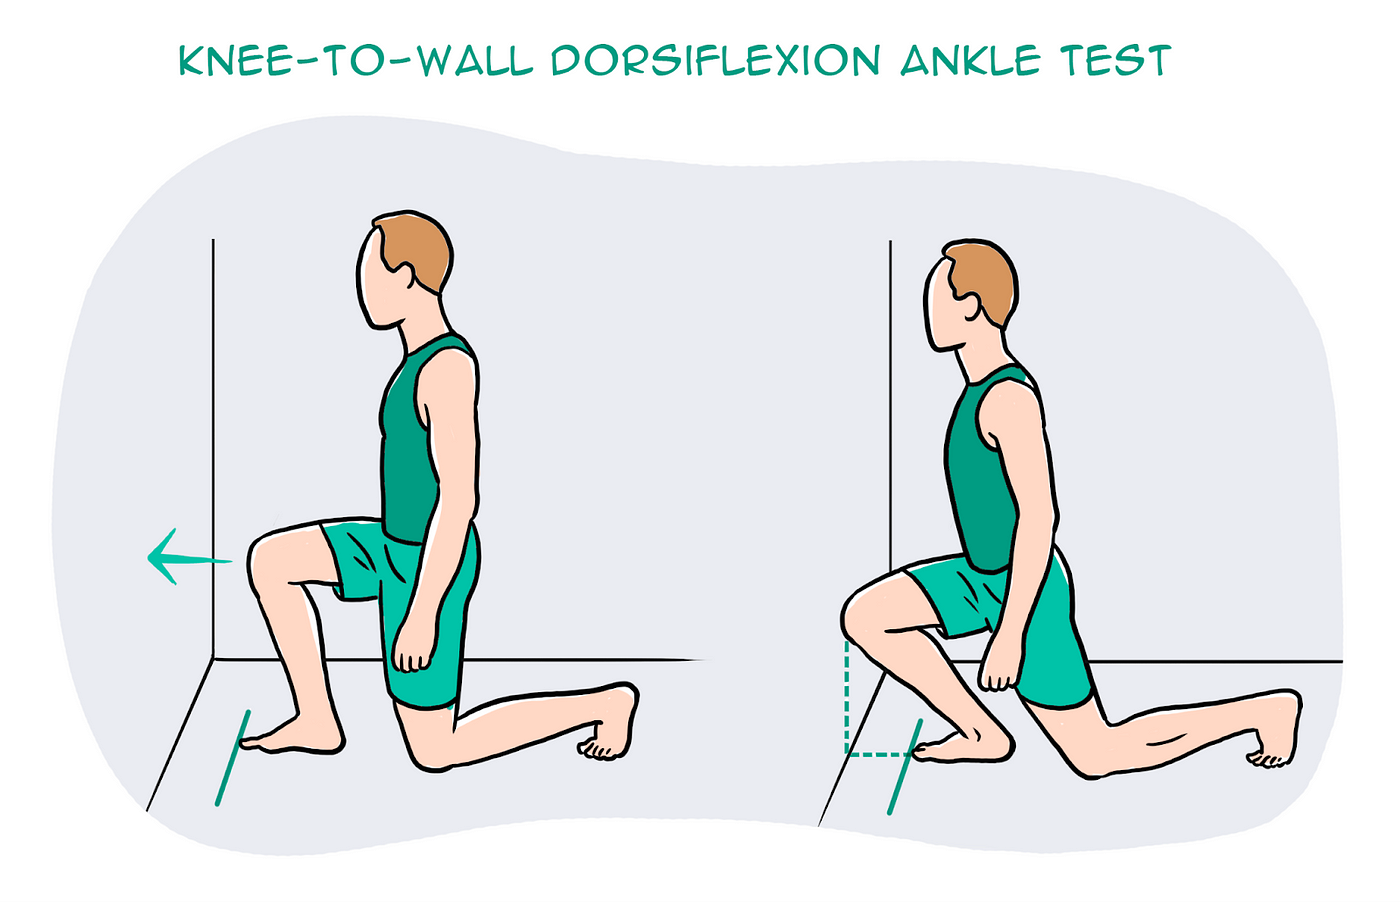 Test your ankle flexibility: Loss of dorsiflexion could be a